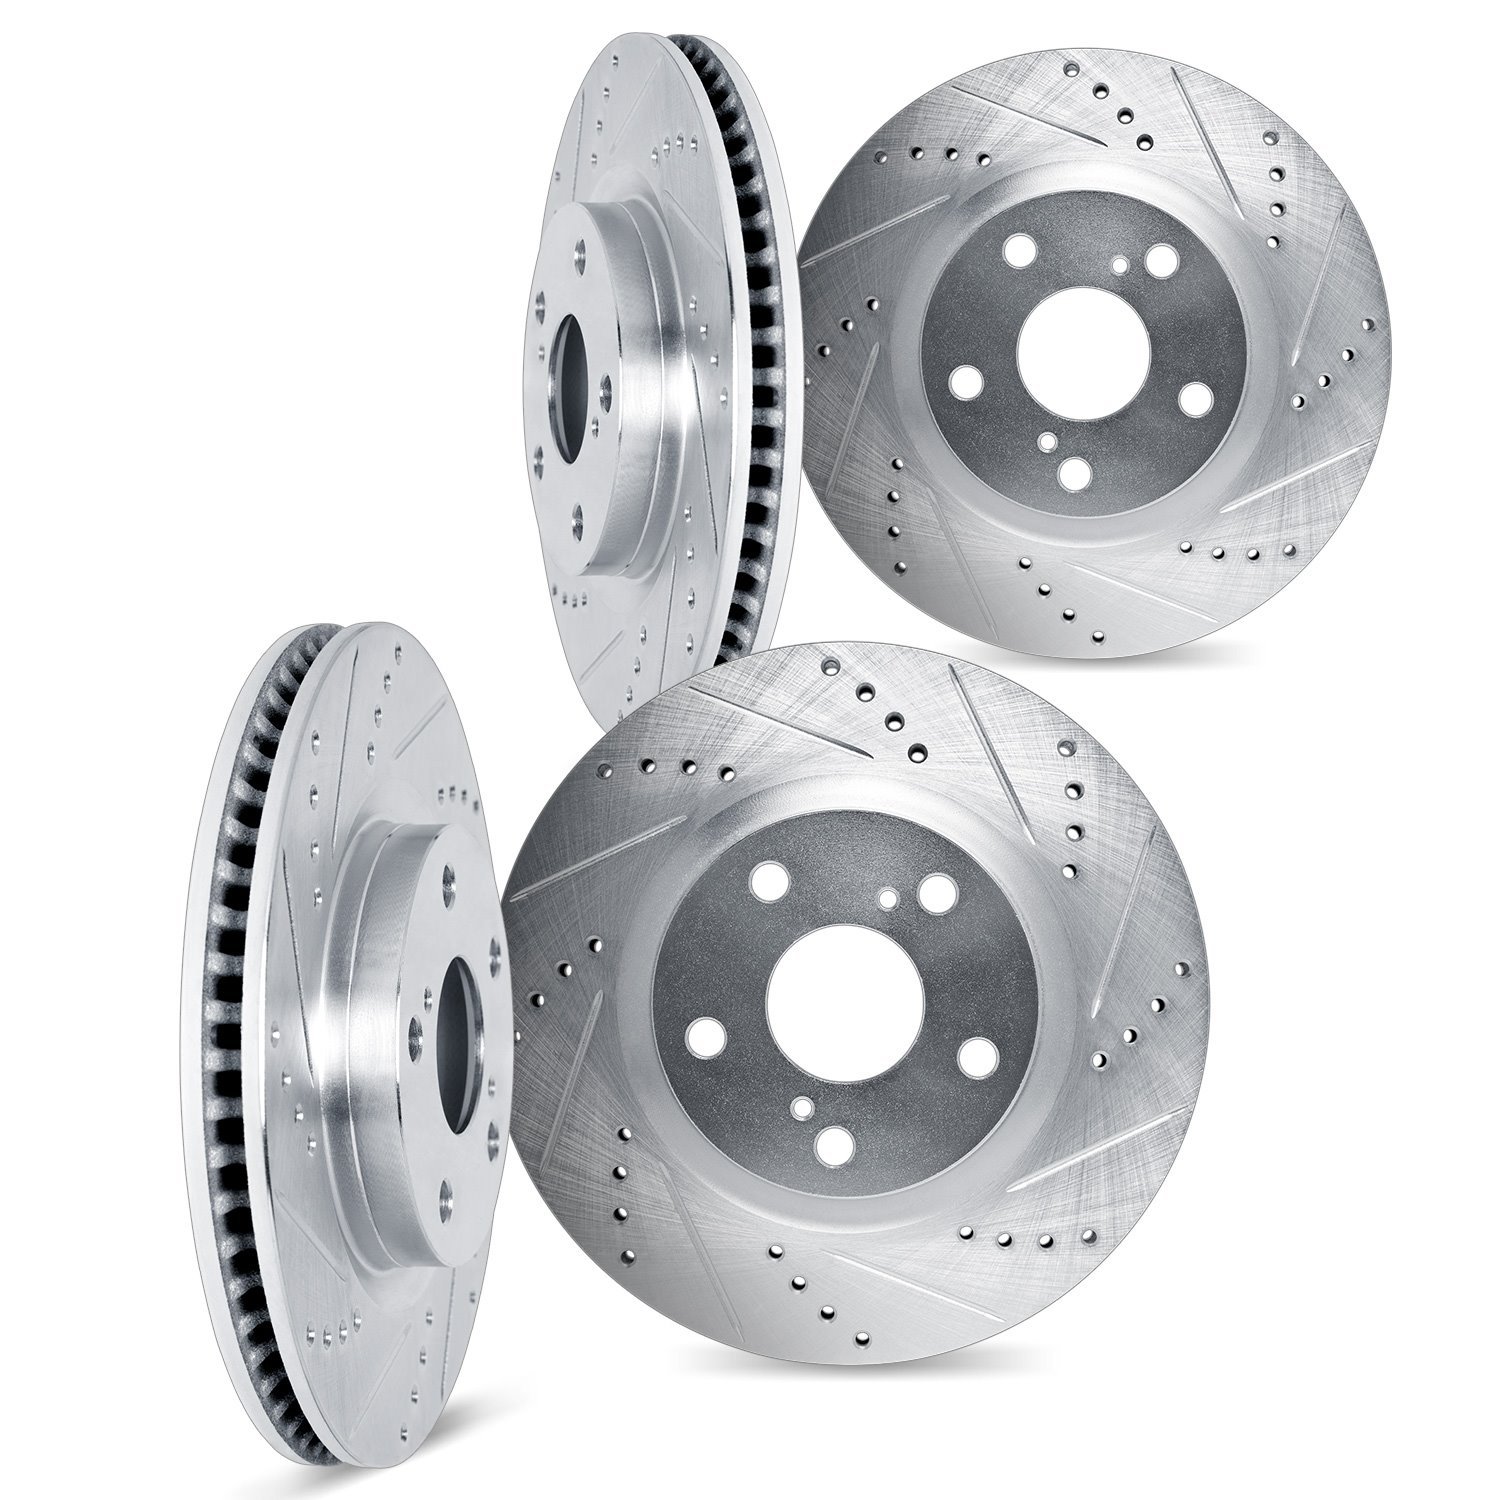 7004-31126 Drilled/Slotted Brake Rotors [Silver], Fits Select BMW, Position: Front and Rear